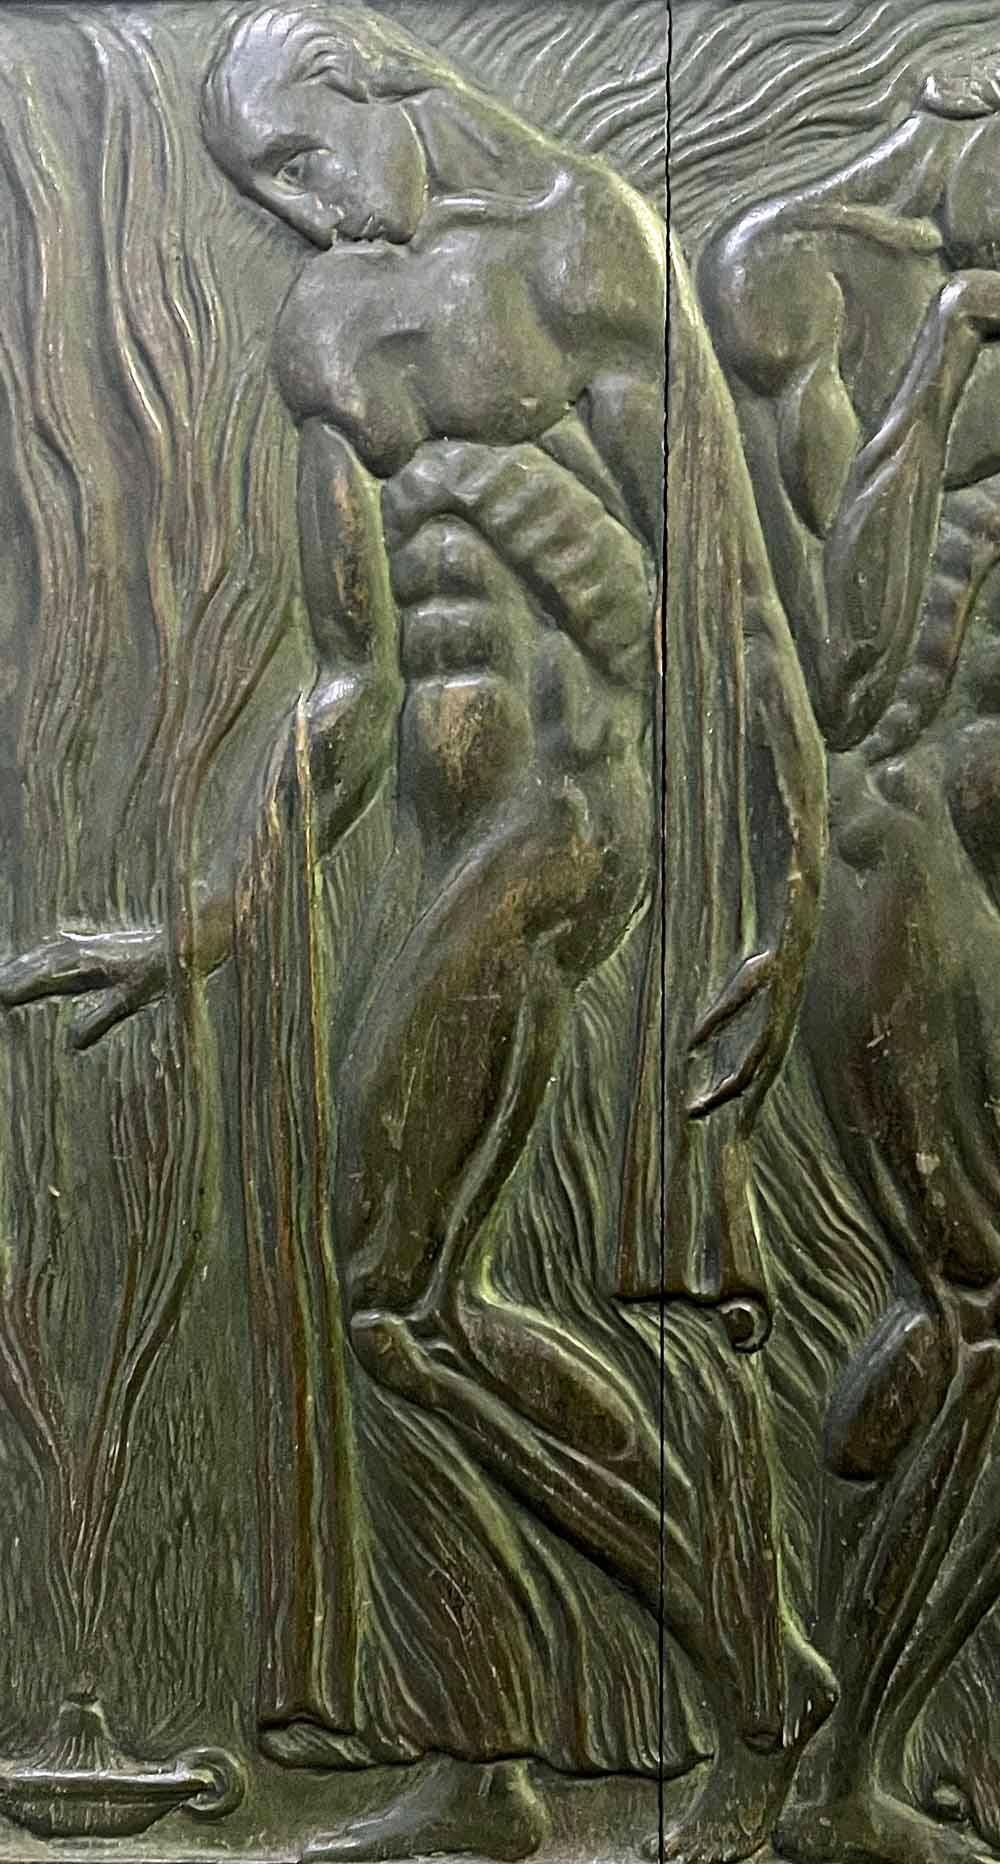 Quite extraordinary in concept and execution, this carved wood relief panel by one of Argentina's leading sculptors in the early 20th century depicts four nude male figures consoling each other and bathing in the rising smoke from an oil lamp on the